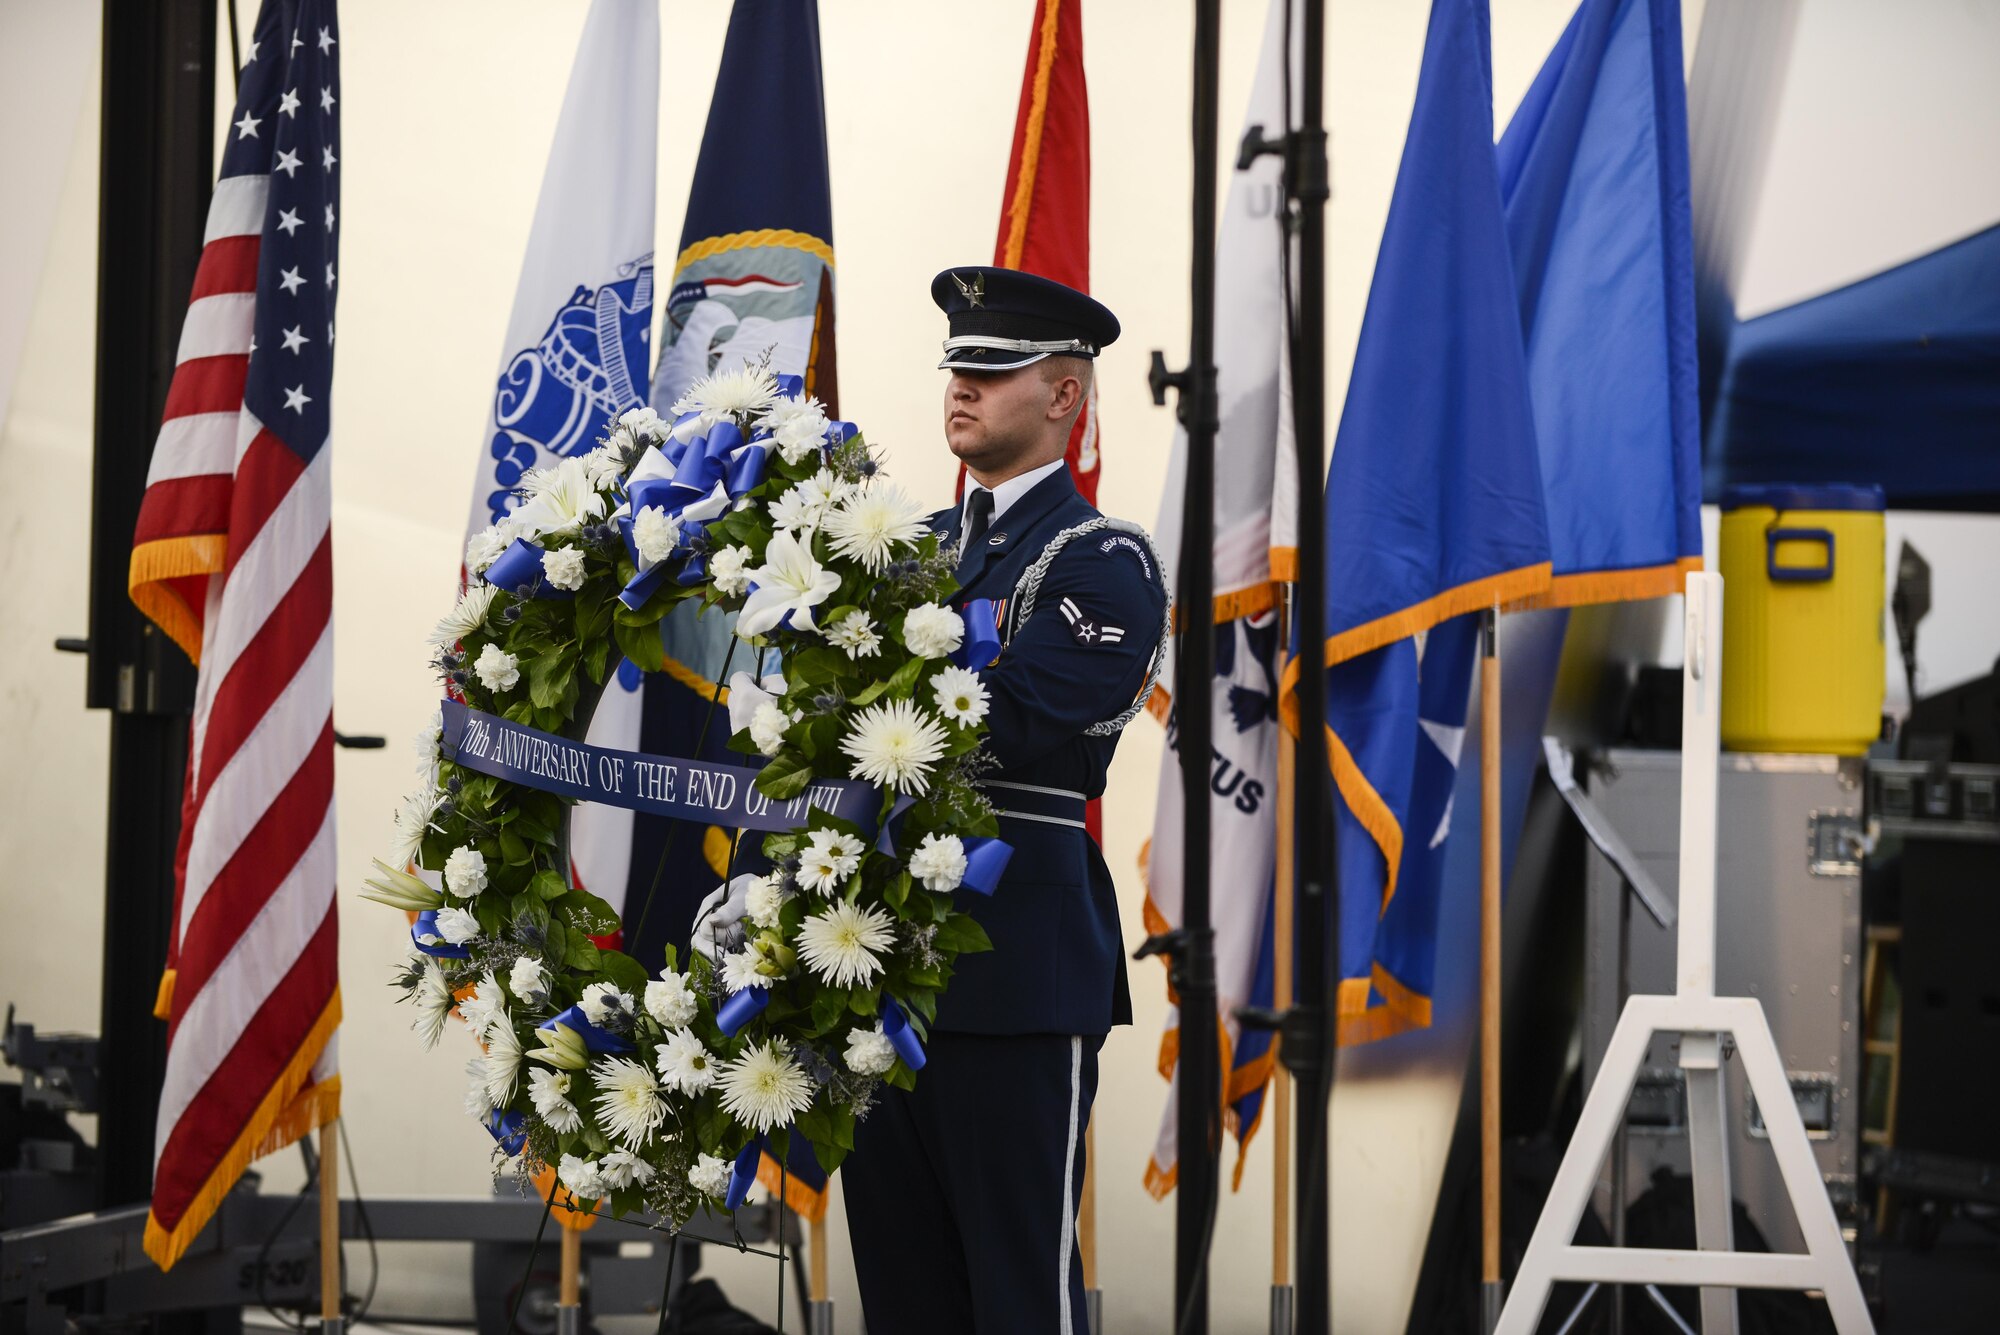 An Airman with the Air Force Honor Guard presents the wreath used in the wreath-laying ceremony at the Air Force Memorial in Arlington, Virginia, commemorating the 70th anniversary of the end of World War II, Aug. 14, 2015. The Air Force Band also put on a concert playing music from the World War II era.  (Air Force photo/Tech. Sgt. Joshua L. DeMotts)